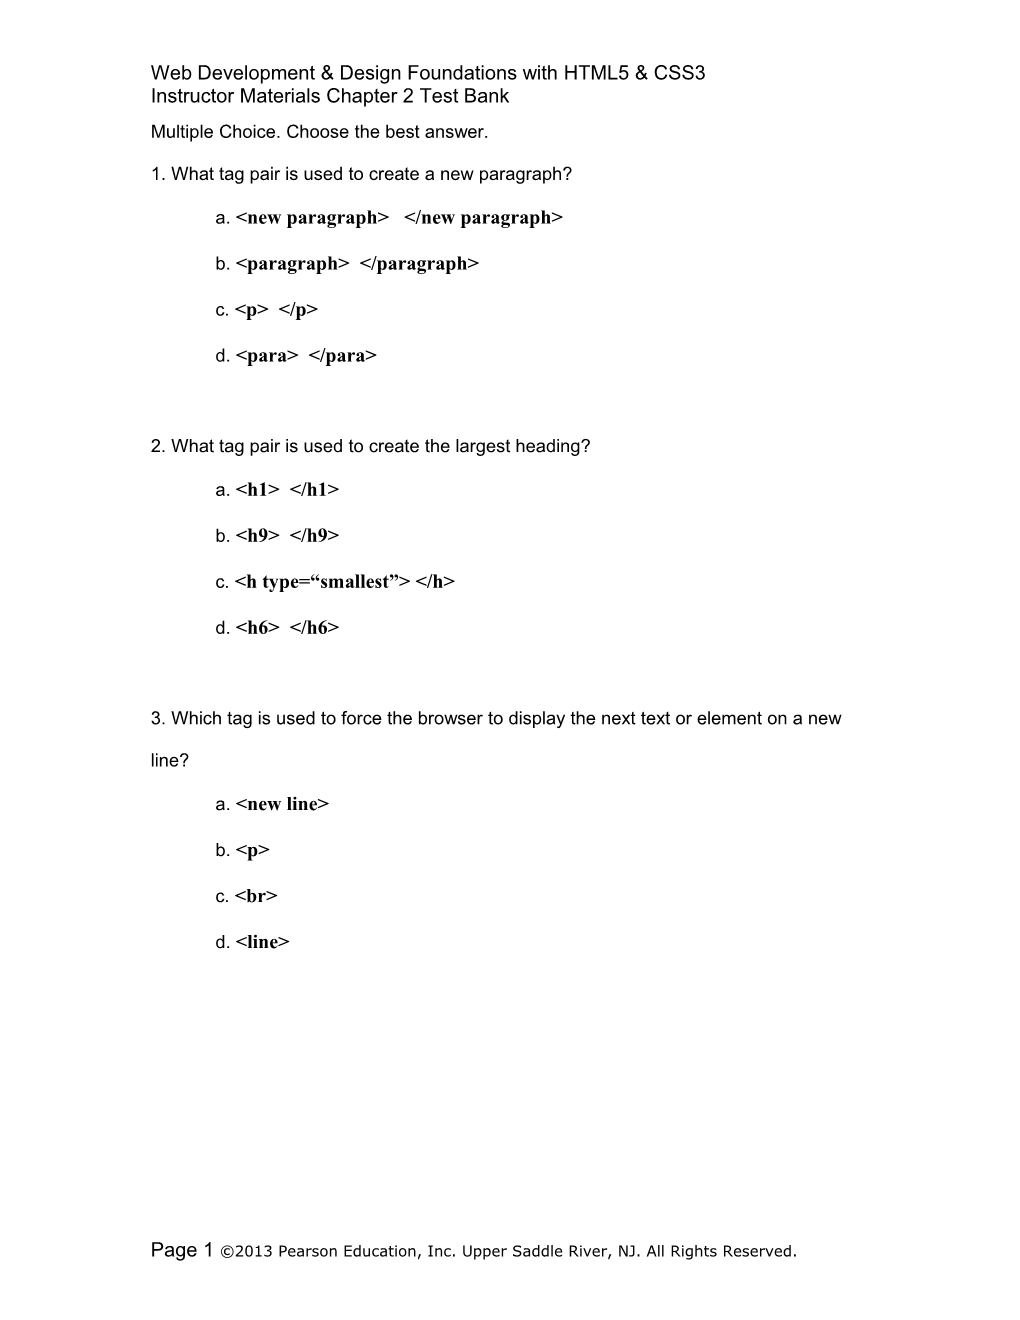 Chapter 2 Test Bank s2